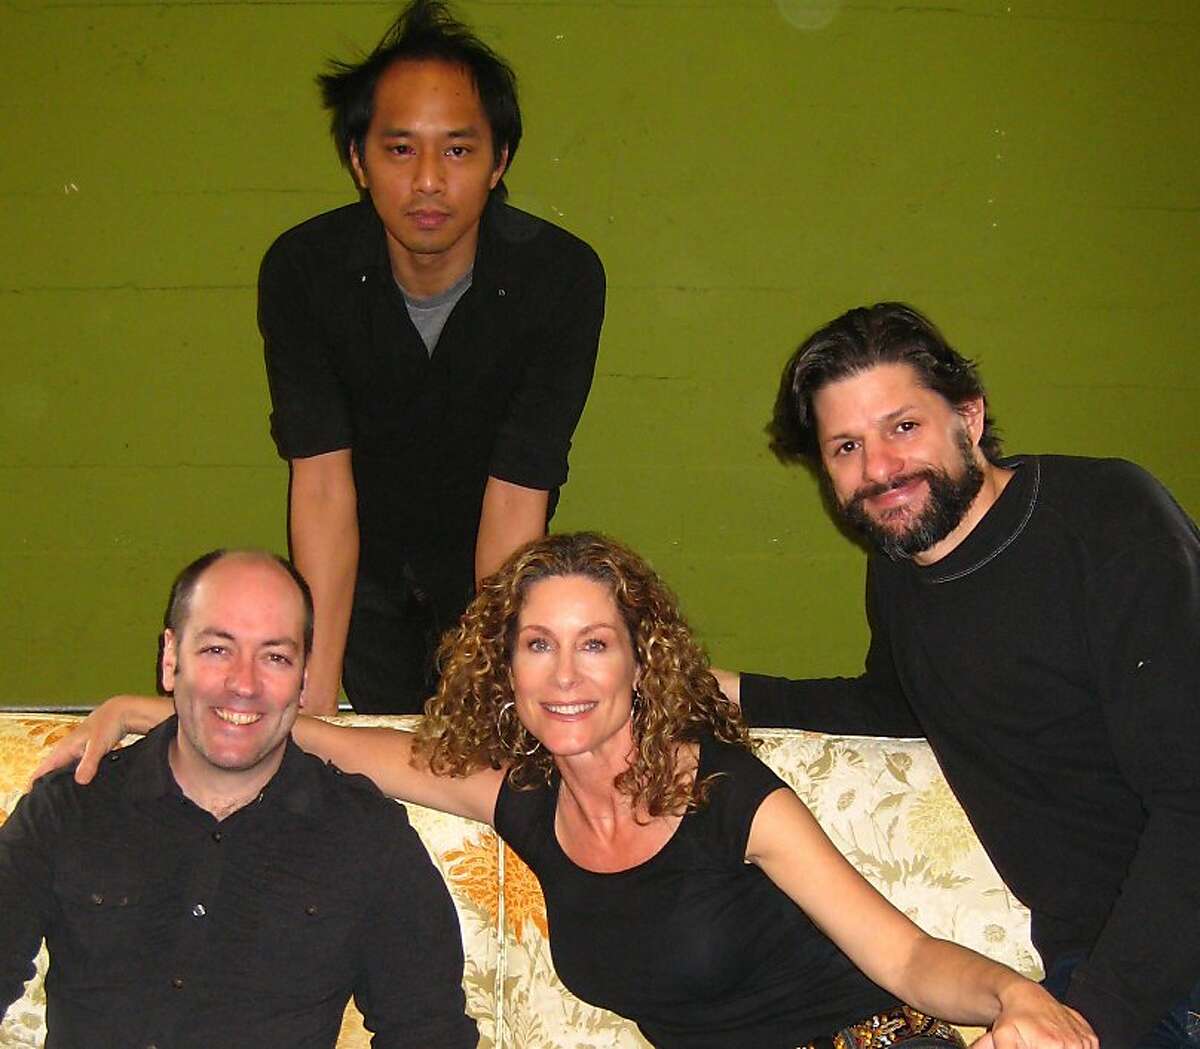 The cast of Magic Theatre's "The Happy Ones," a drama by Julie Marie Myatt, includes (from left) Liam Craig, Jomar Tagatac, Marcia Pizzo and Gabriel Marin.The production, directed by Jonathan Moscone, runs through April 21.